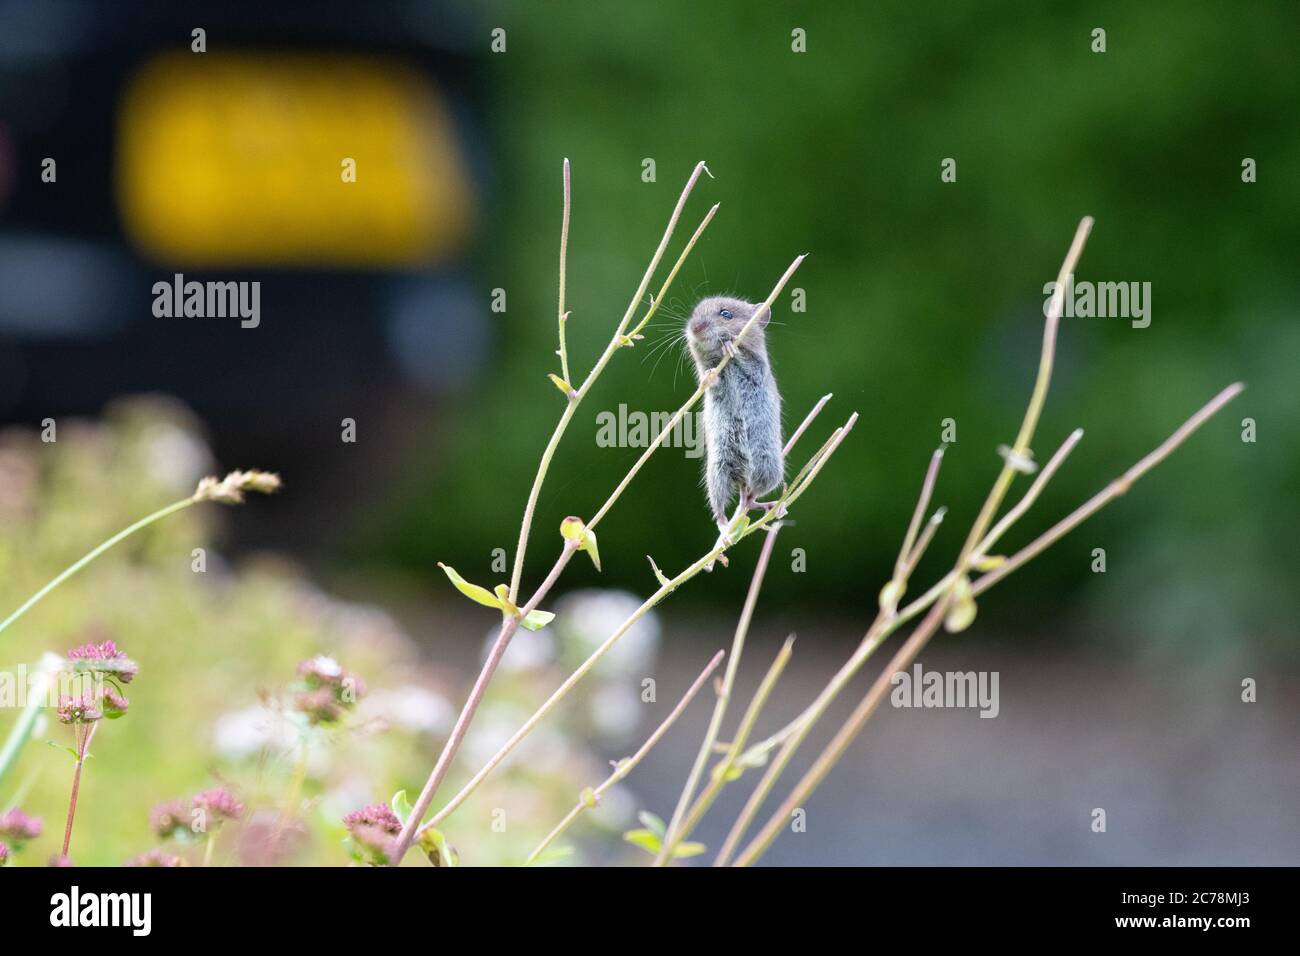 Wood Mouse Apodemus sylvaticus climbing plant stems in UK front wildlife garden with car parked in driveway collecting the seedheads - Scotland, UK Stock Photo